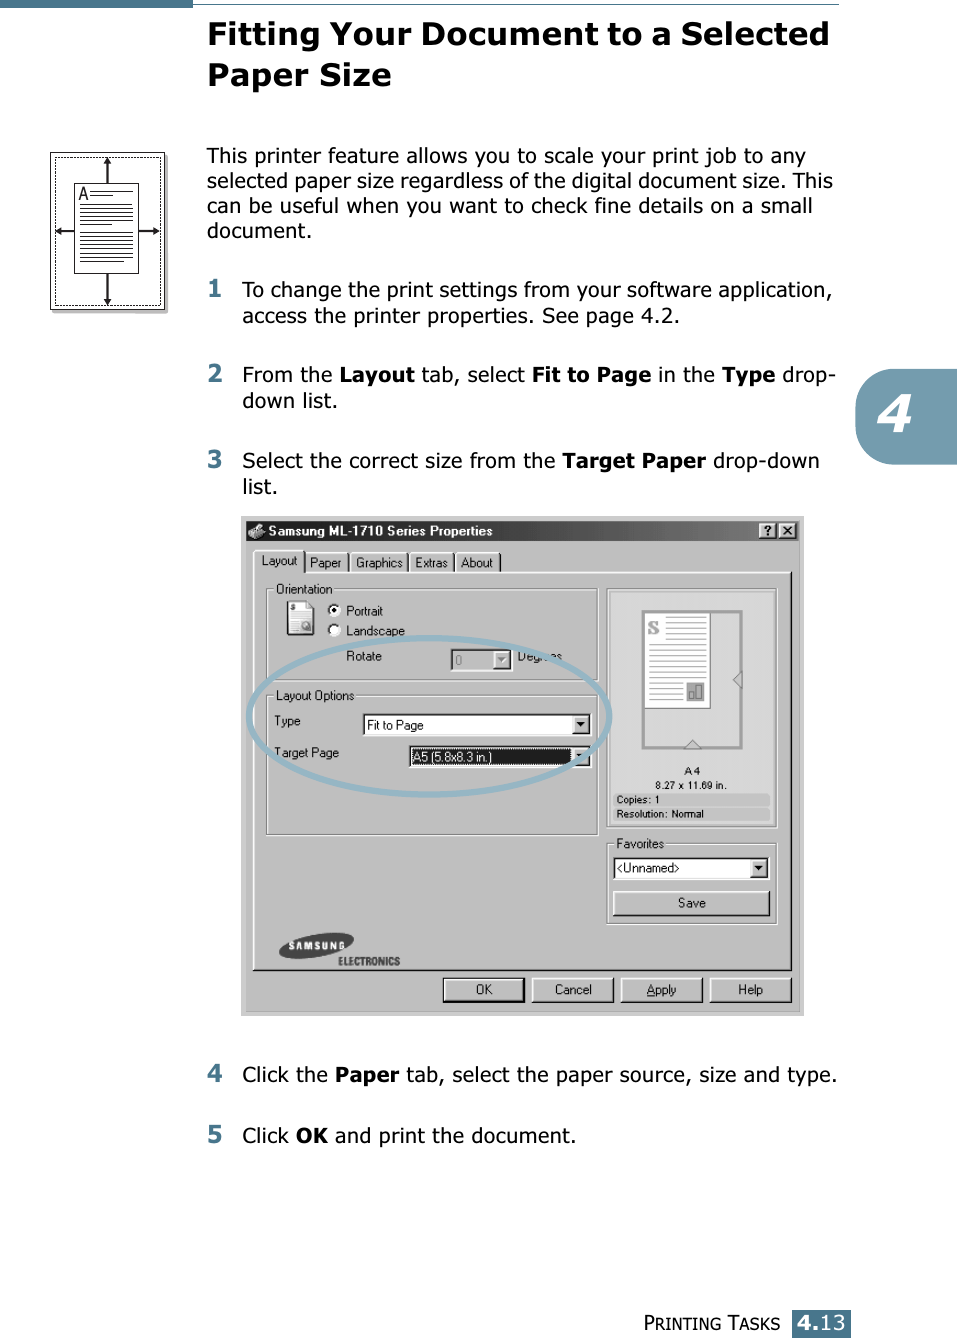 PRINTING TASKS4.134Fitting Your Document to a Selected Paper SizeThis printer feature allows you to scale your print job to any selected paper size regardless of the digital document size. This can be useful when you want to check fine details on a small document. 1To change the print settings from your software application, access the printer properties. See page 4.2.2From the Layout tab, select Fit to Page in the Type drop-down list. 3Select the correct size from the Target Paper drop-down list.4Click the Paper tab, select the paper source, size and type.5Click OK and print the document.A